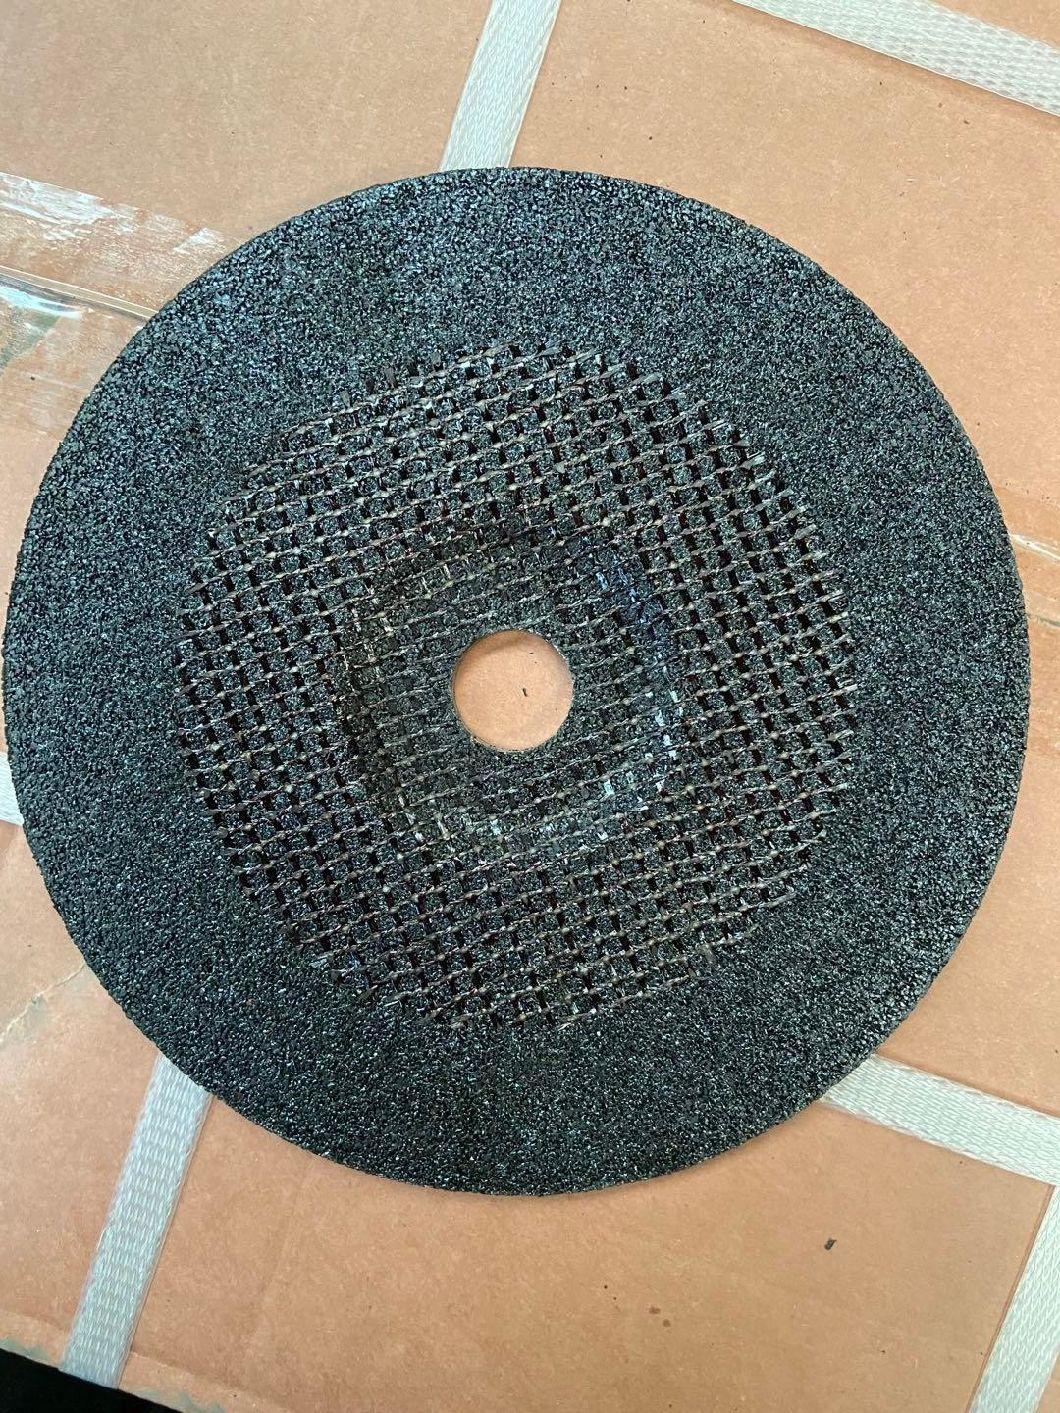 100mm, 115mm, 125mm Abrasive Grinding Discs for Metal/Stainless Cutting